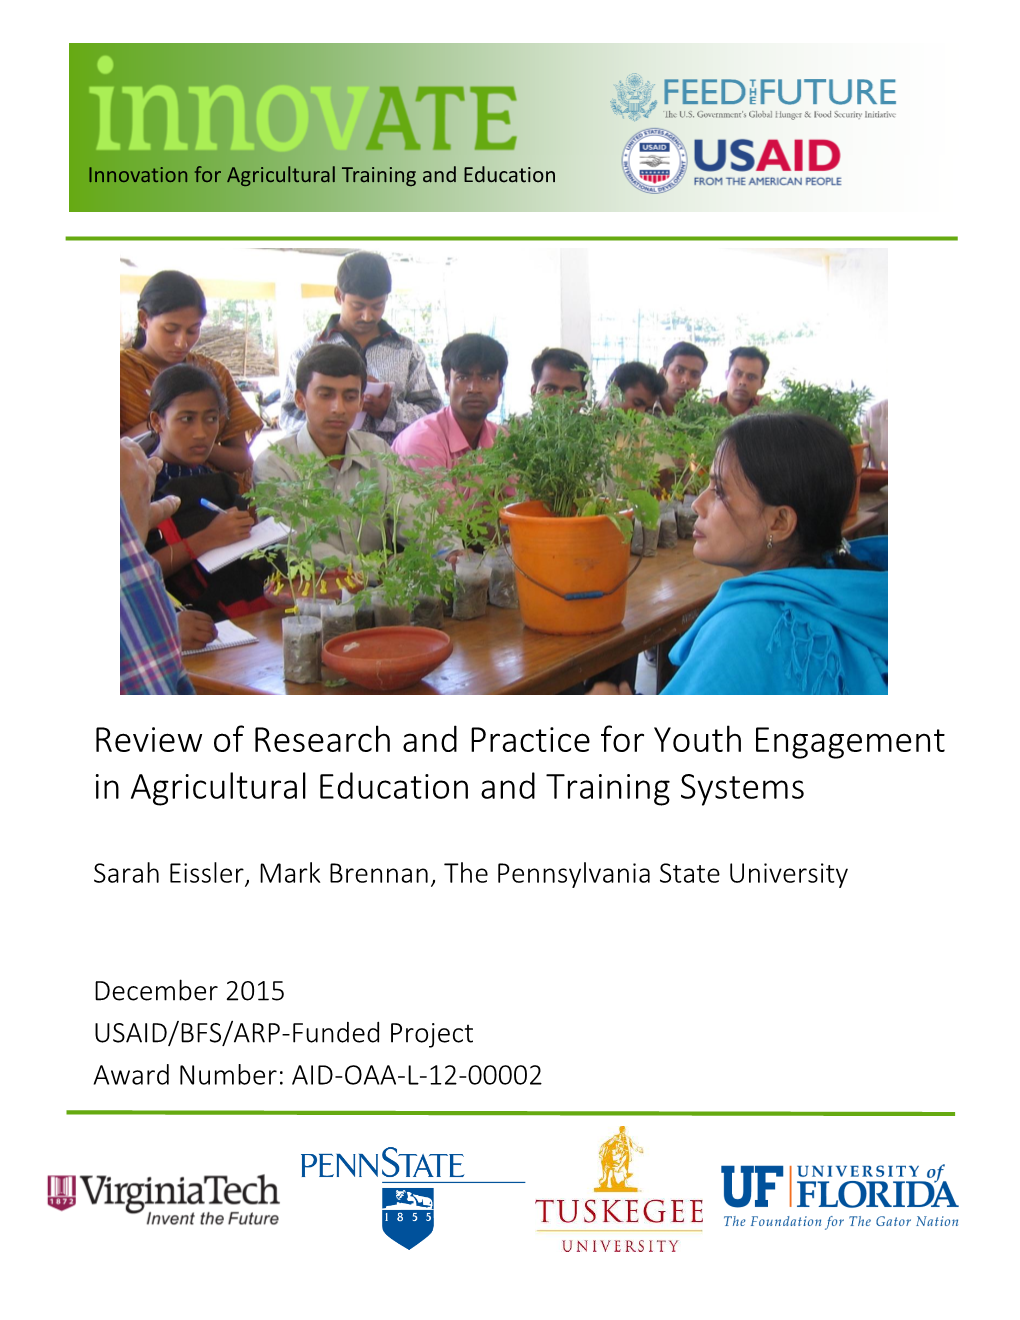 Review of Research and Practice for Youth Engagement in Agricultural Education and Training Systems